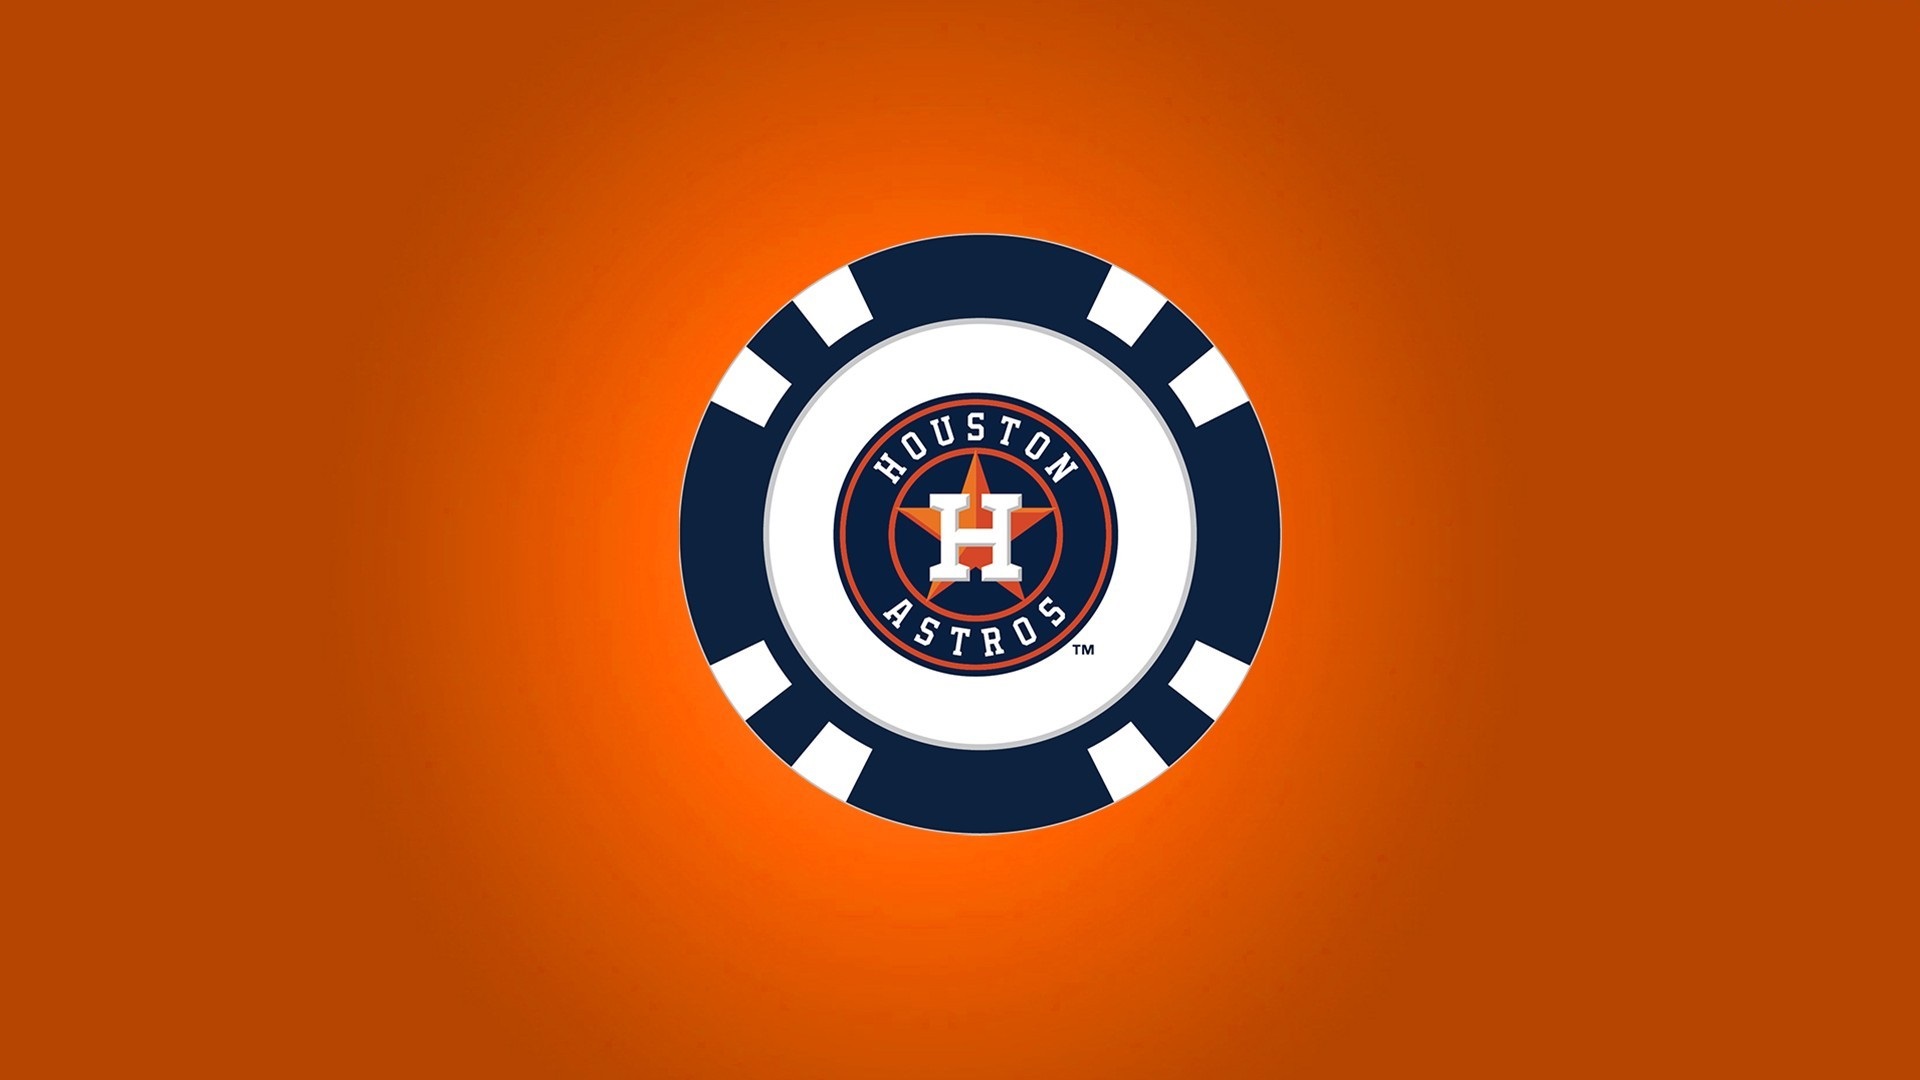 Houston Astros Wallpaper with high-resolution 1920x1080 pixel. You can use this wallpaper for Mac Desktop Wallpaper, Laptop Screensavers, Android Wallpapers, Tablet or iPhone Home Screen and another mobile phone device